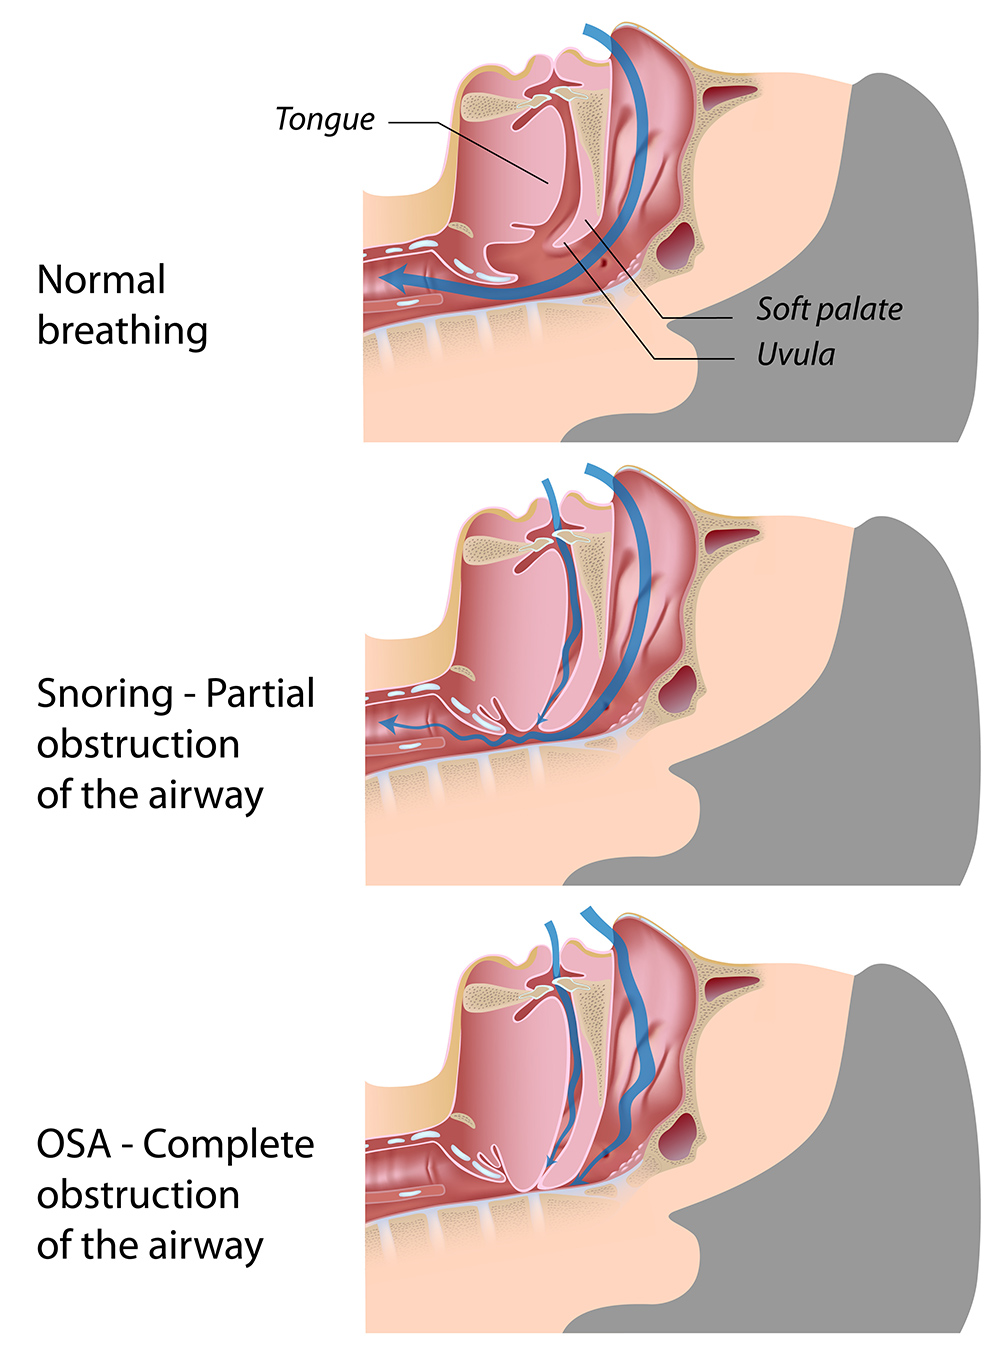 A medical illustration comparing normal breathing, snoring, and an obstructed airway